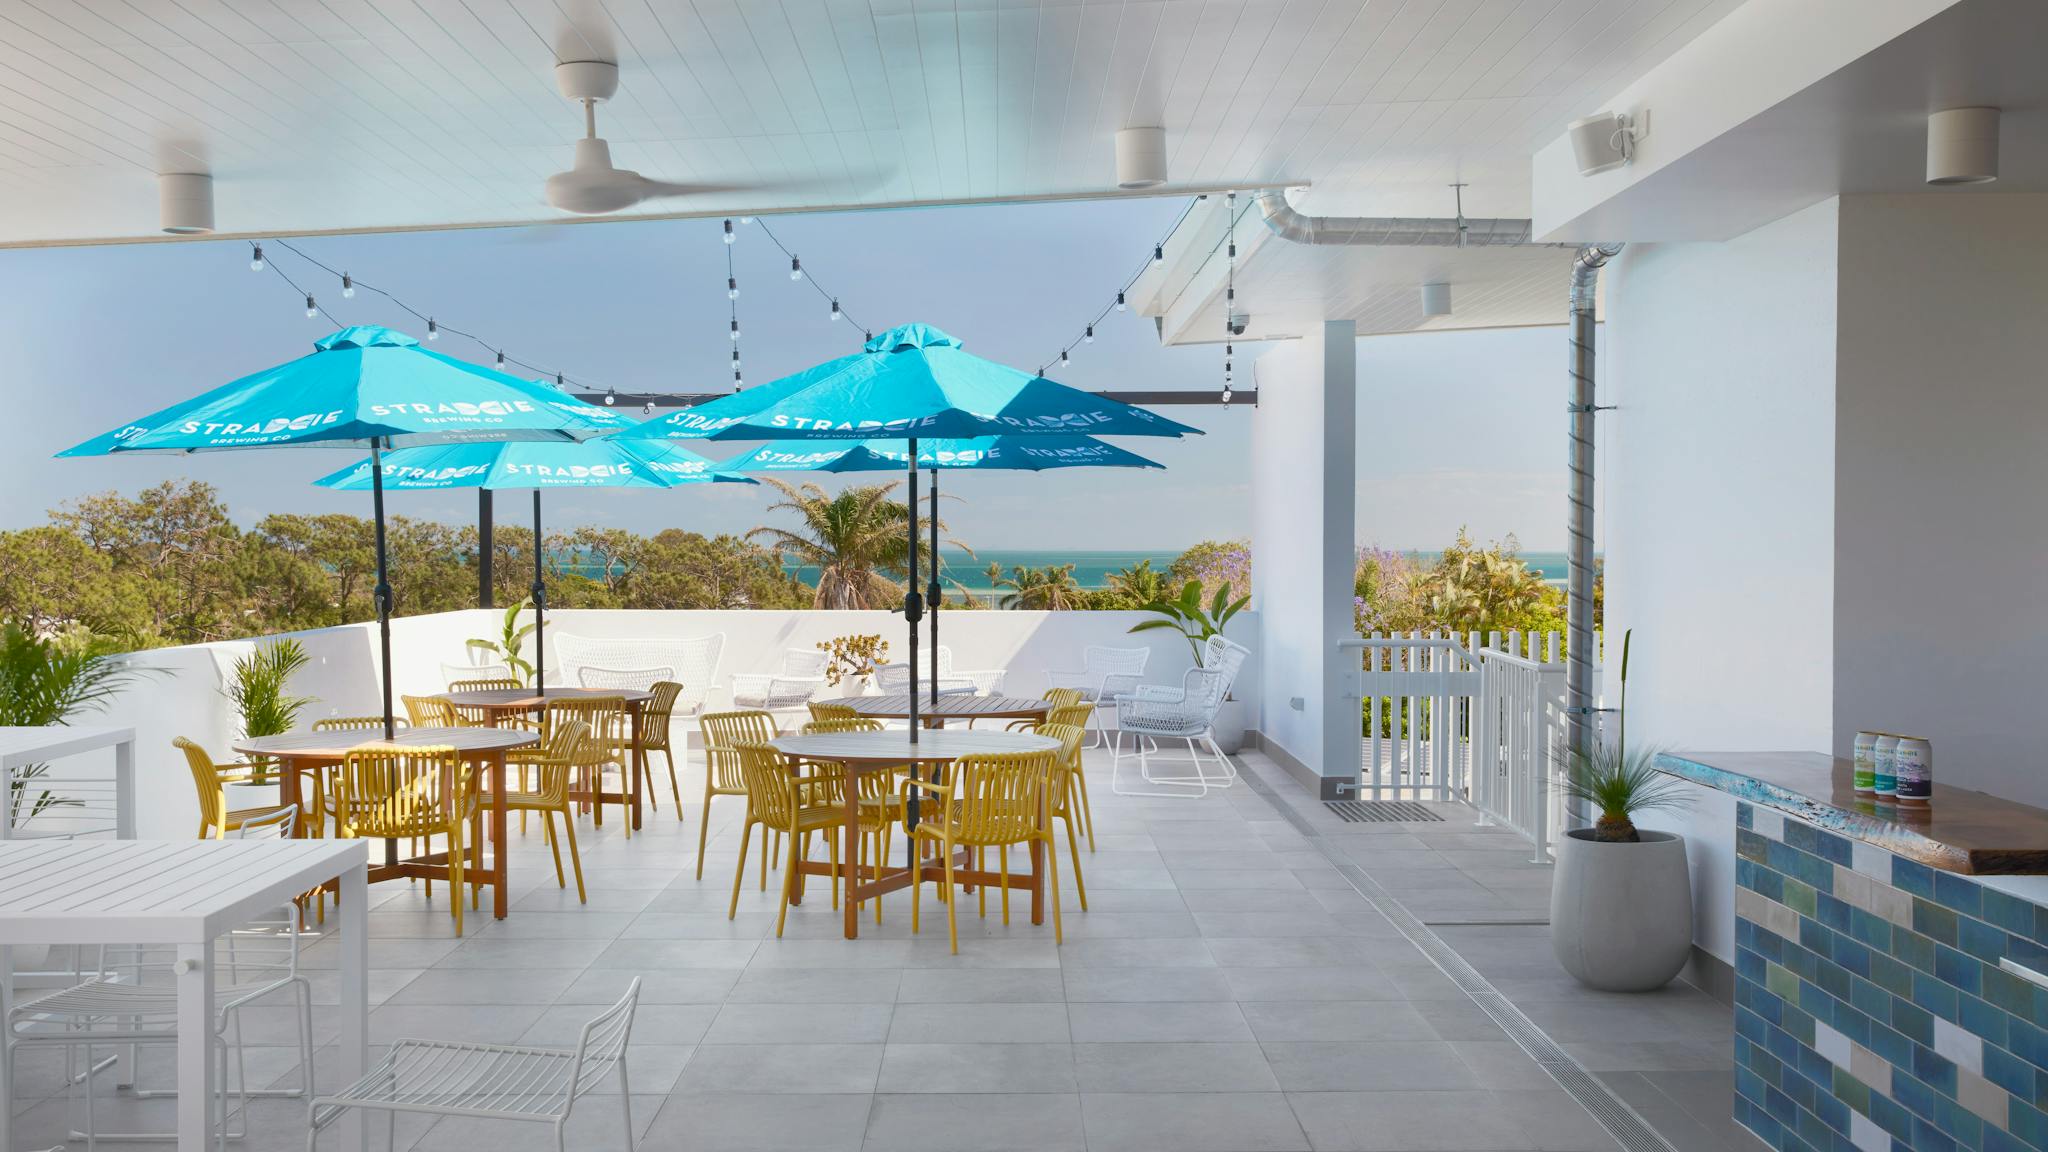 Rooftop Deck with low set tables covered with umbrellas, and views of the water and greenery